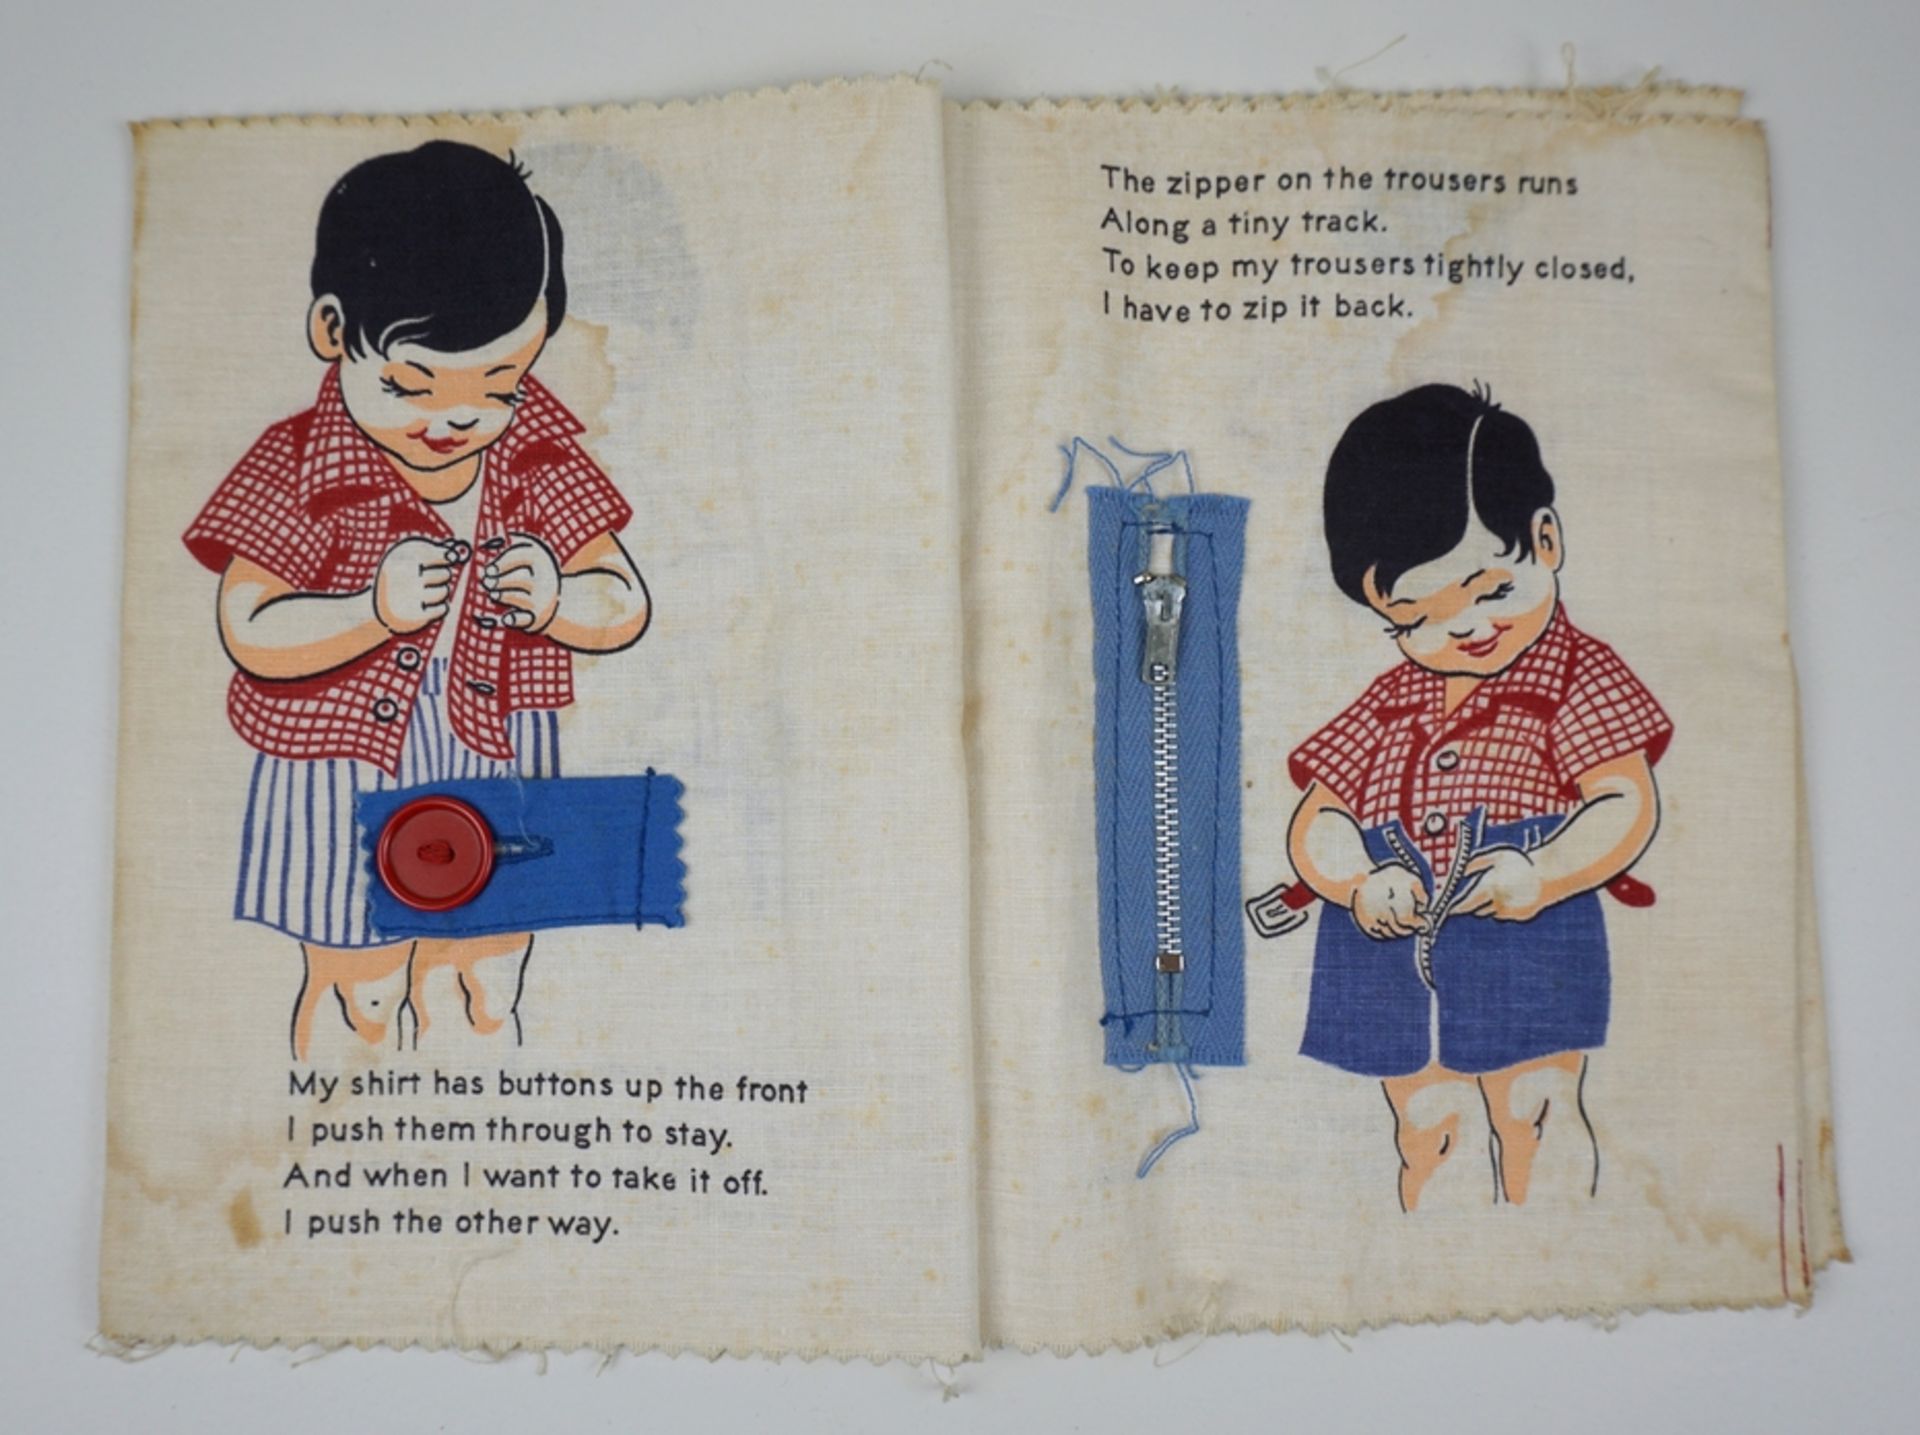 Kay Clark "All by Himself", Stoff-Lernbuch für Kinder, Plakie Product, Youngstown, Ohio, 1950 - Image 4 of 6